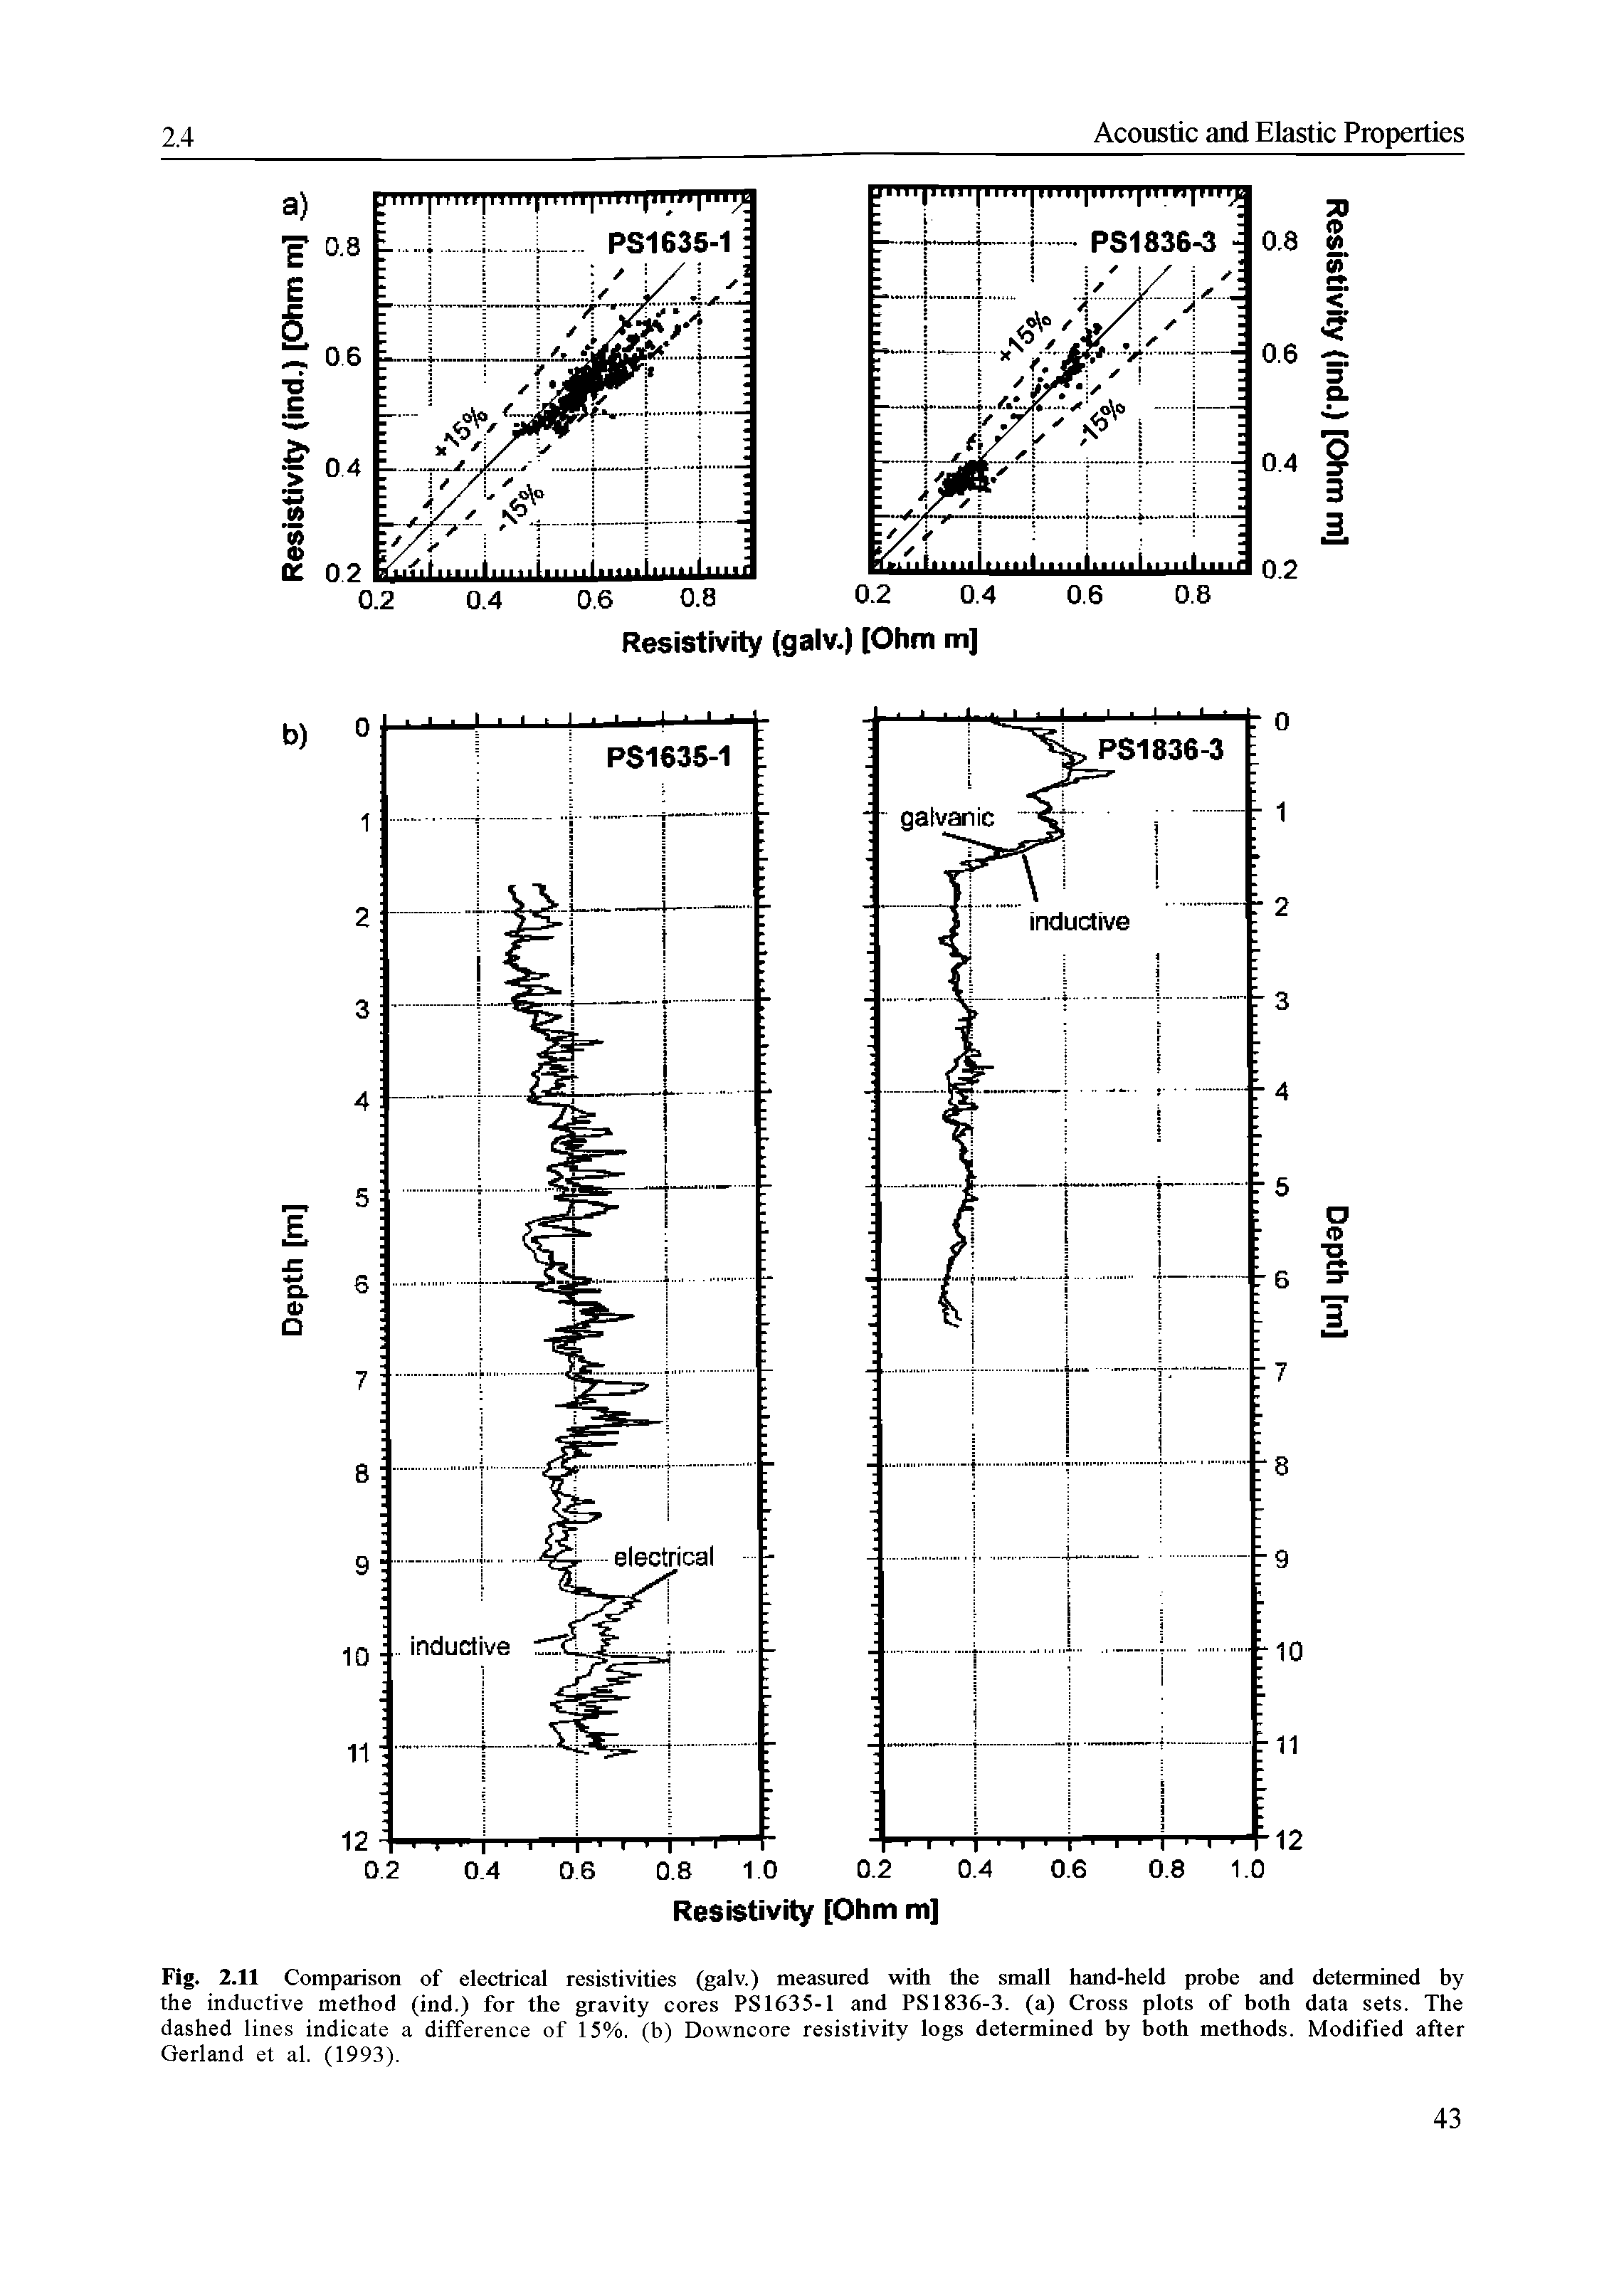 Fig. 2.11 Comparison of electrical resistivities (galv.) measured with the small hand-held prohe and determined hy the inductive method (ind.) for the gravity cores PS1635-1 and PS1836-3. (a) Cross plots of hoth data sets. The dashed lines indicate a difference of 15%. (b) Downcore resistivity logs determined hy hoth methods. Modified after Gerland et al. (1993).